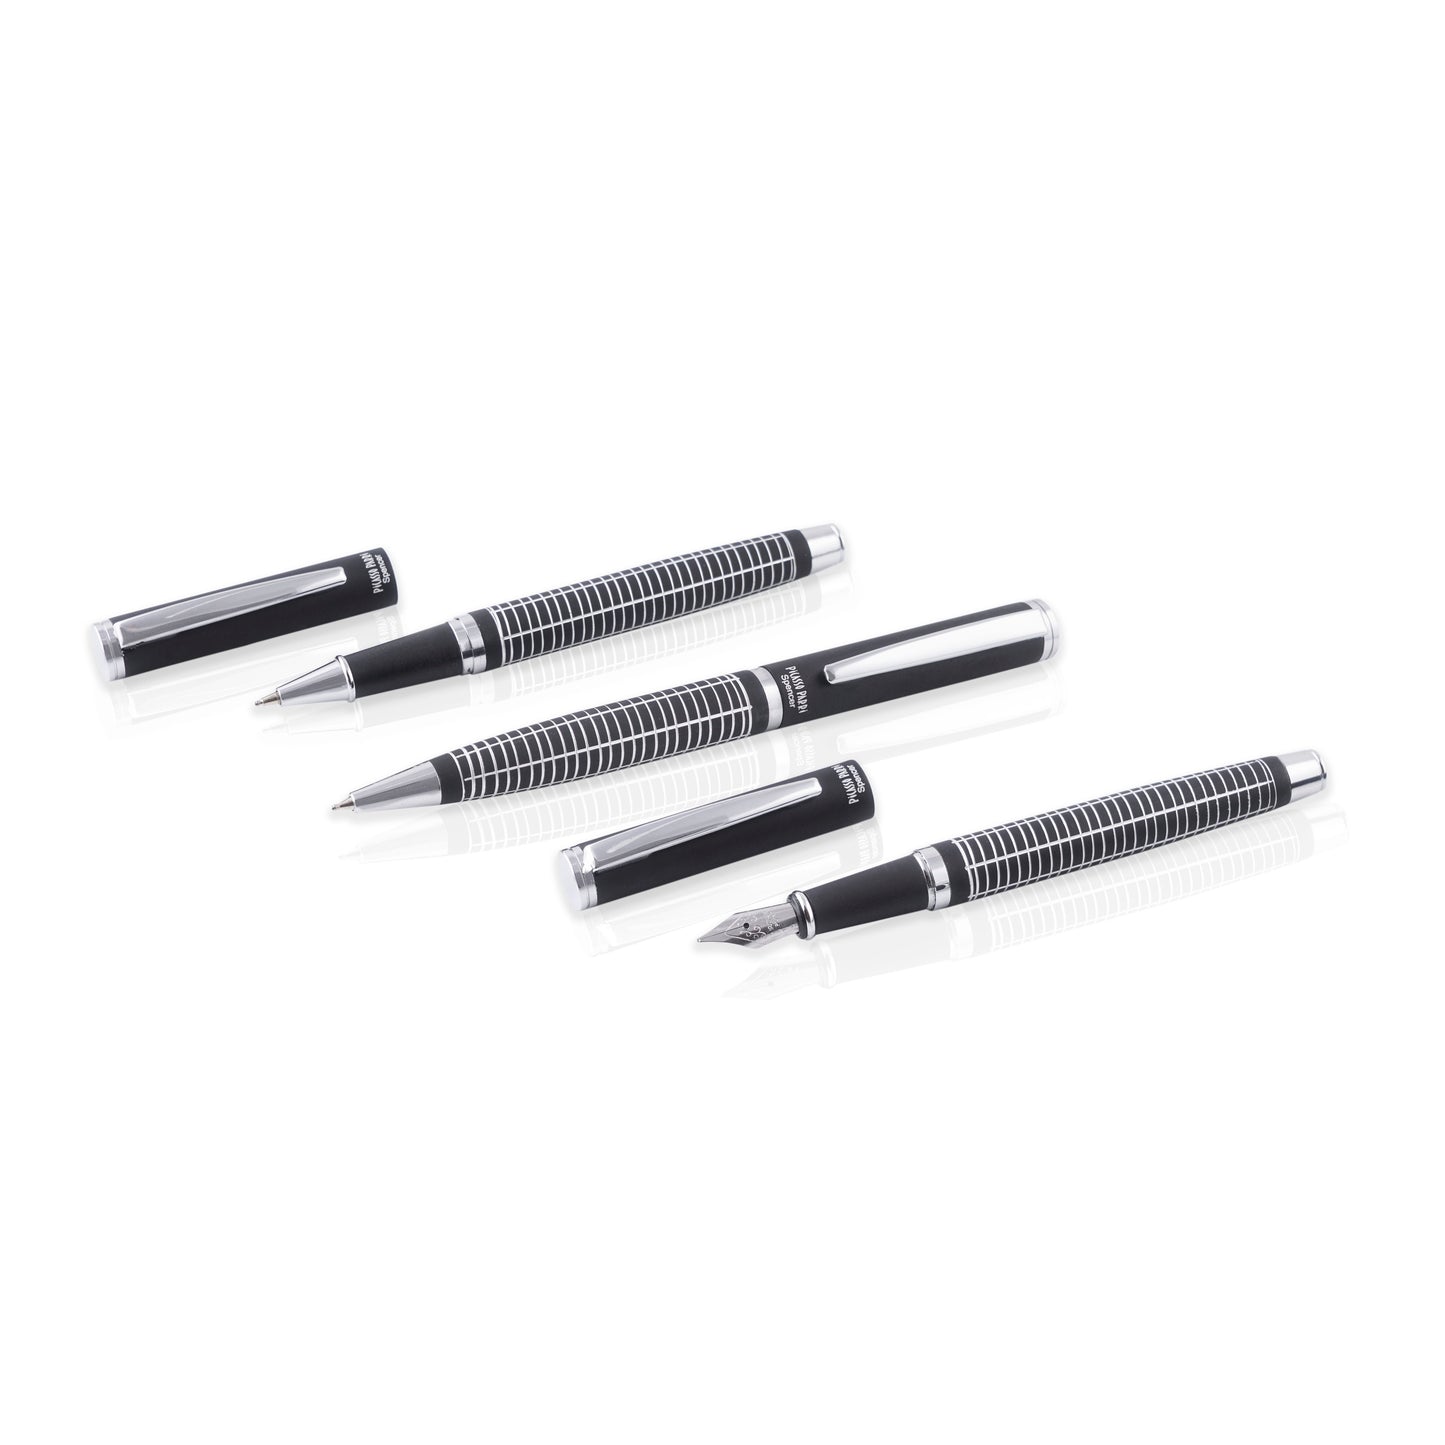 Picasso Parri Spencer 3 In 1 Ball Pen, Roller Pen And Fountain Pen Set